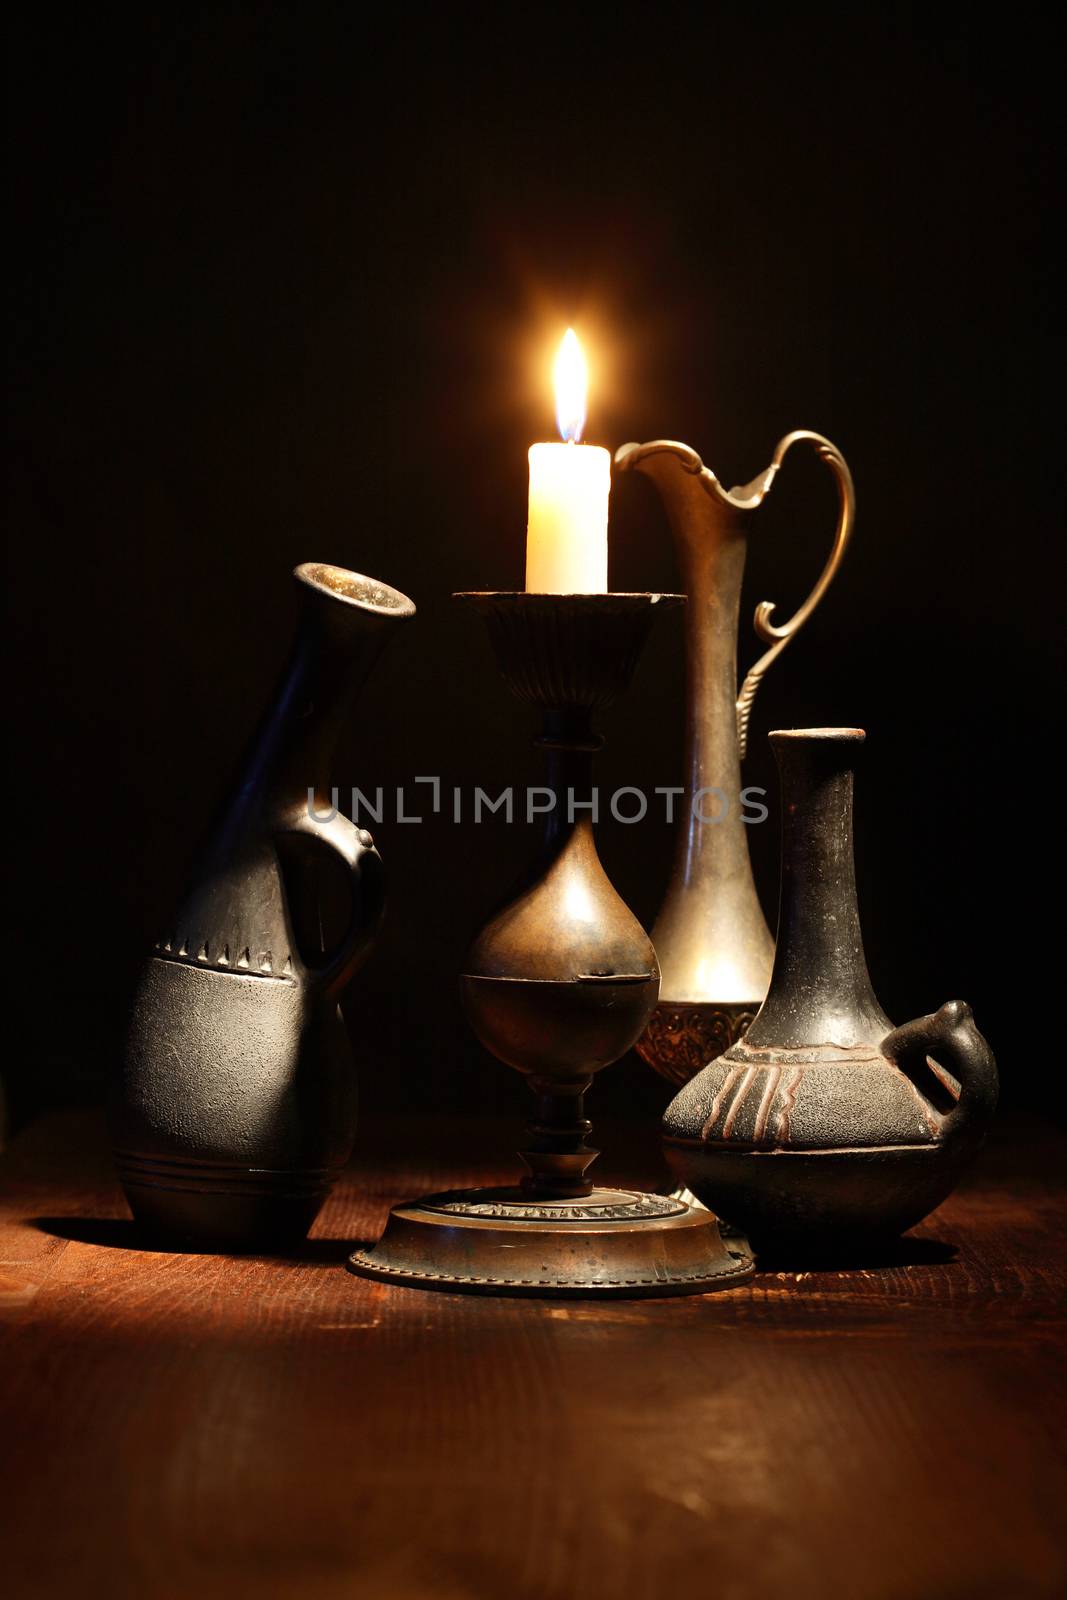 Set of nice ancient vases near lighting candle on dark background